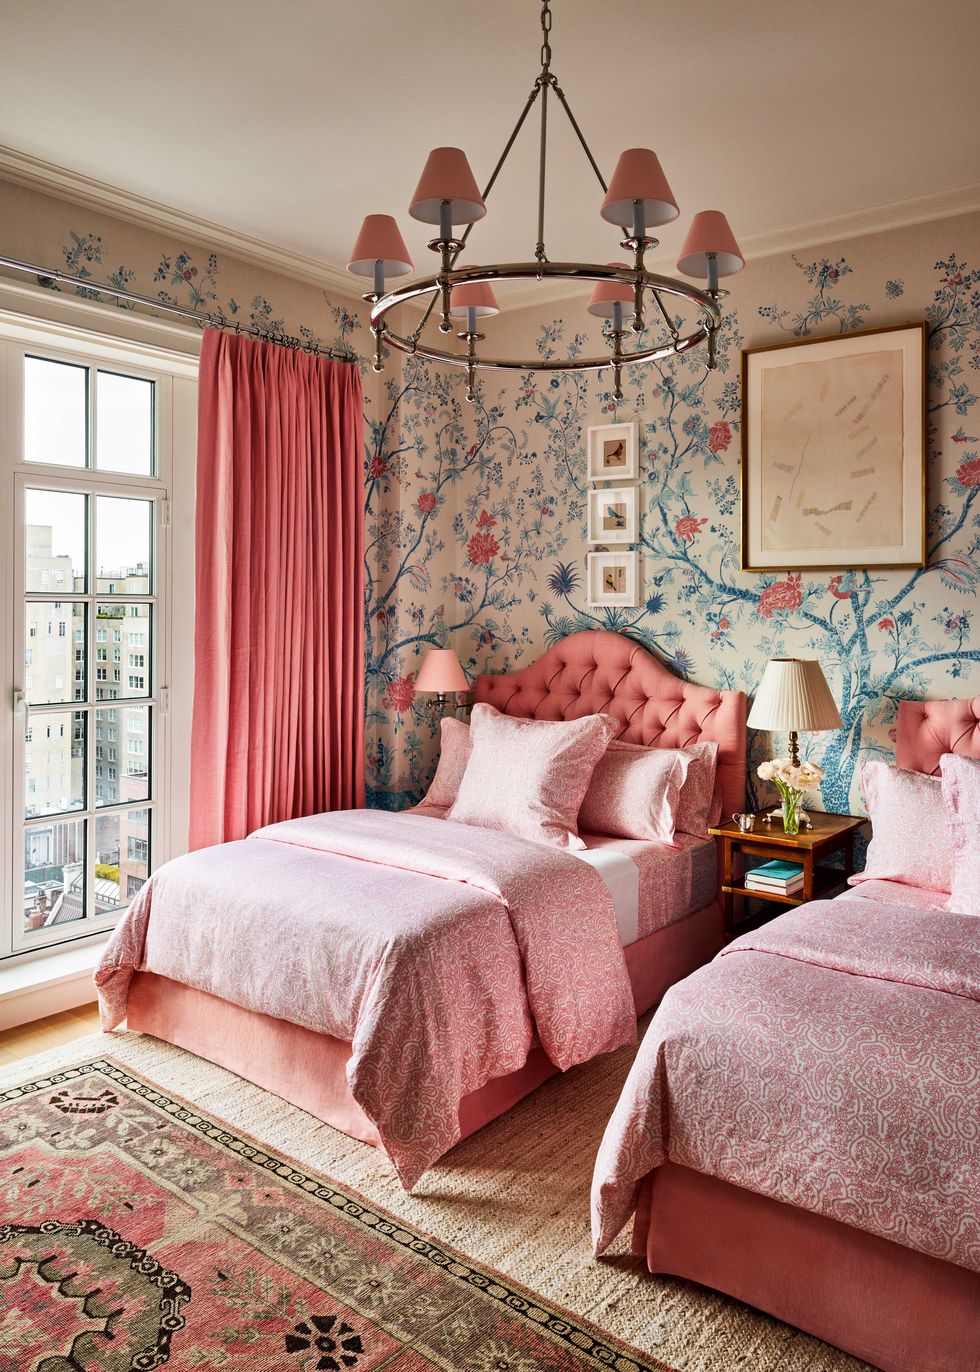 twin beds with a salmony pink upholstered headboards and matching curtains, linens in a patterned pink fabric, floral and tree print wallpaper, wooden nightstands with lamps, chandelier with six small shades in matching pink